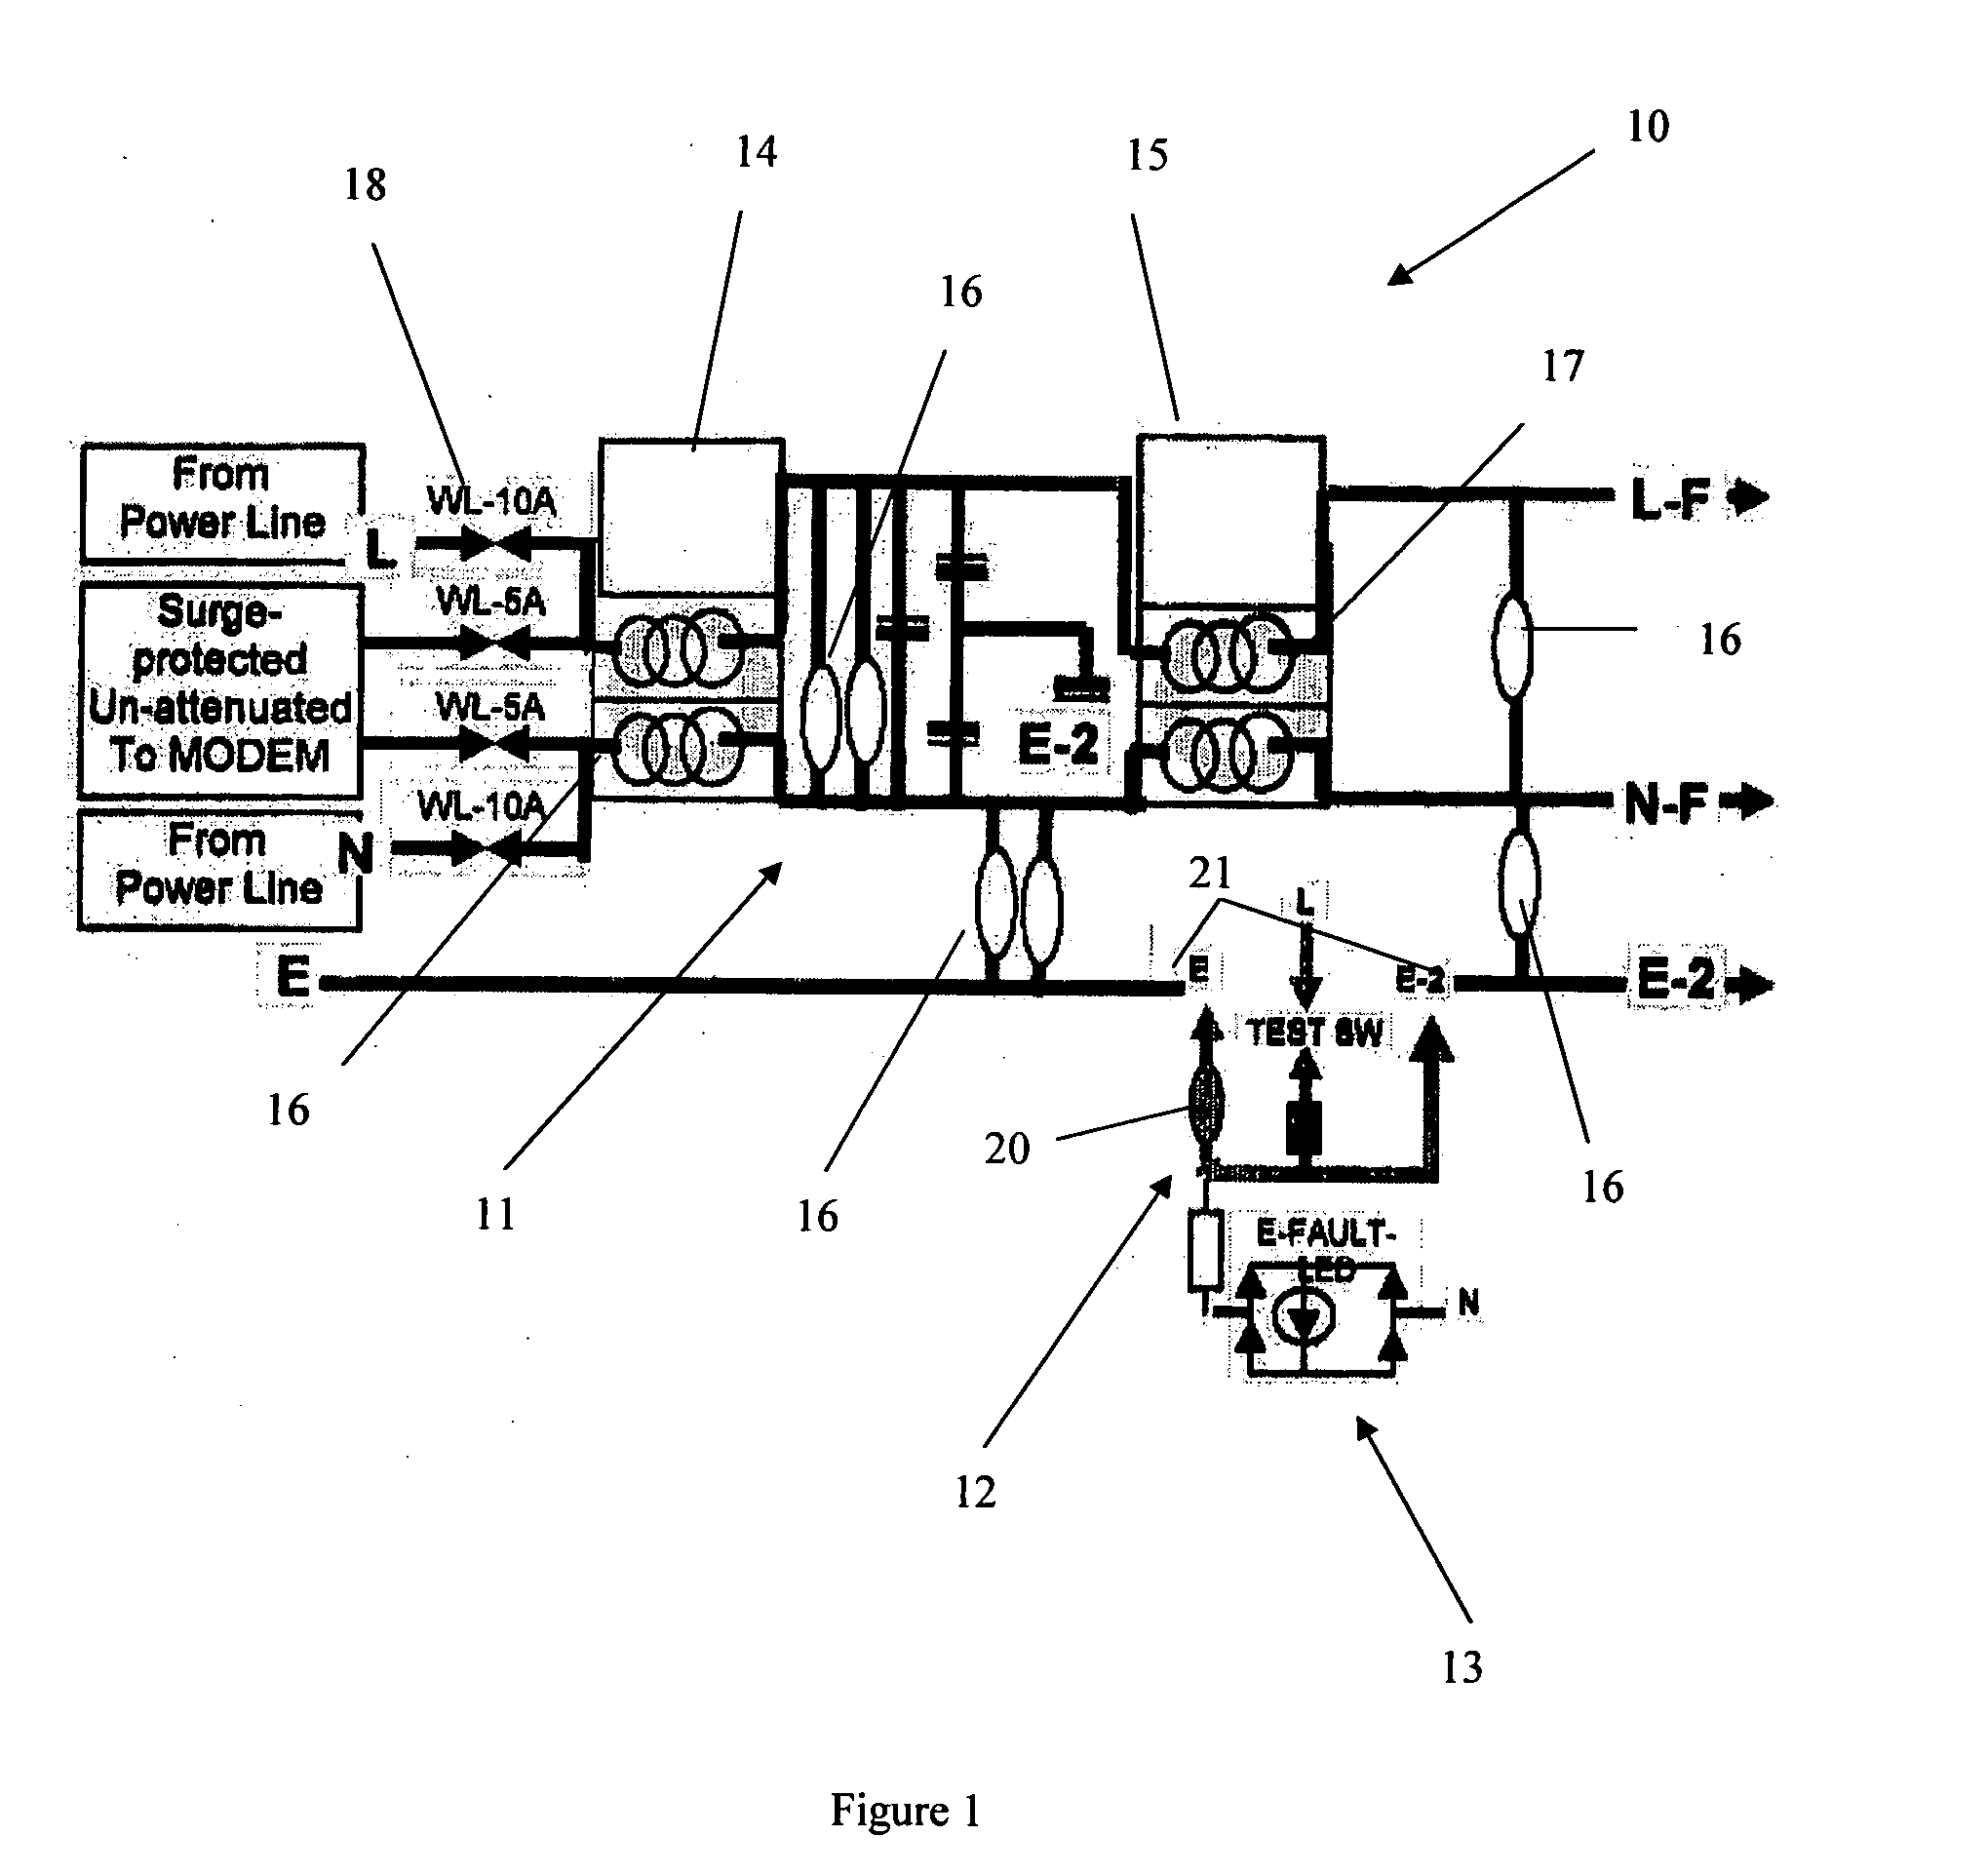 Electrical interface protecting apparatus